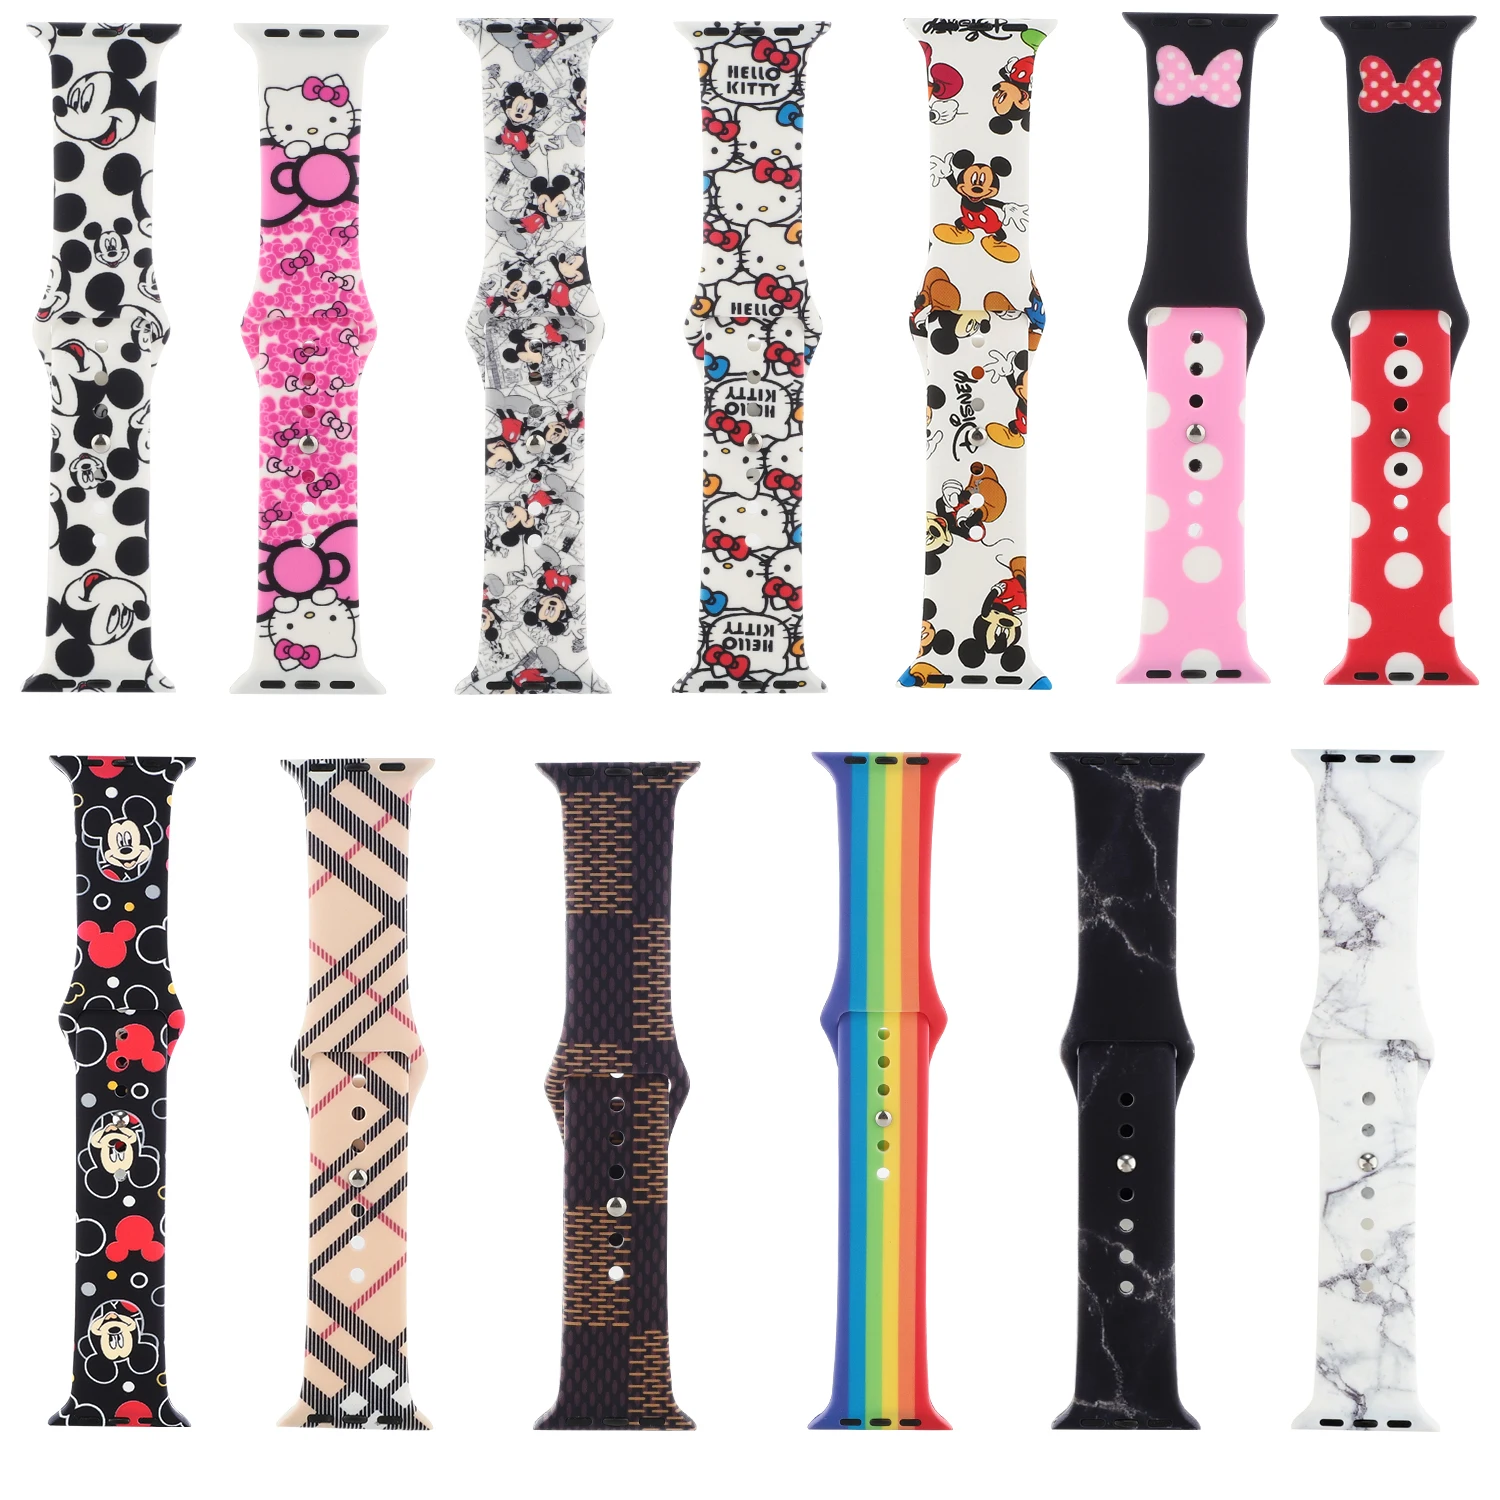 

IVANHOE Watch Bands for Apple Watch Band 40mm 38mm 42mm 44mm Silicone Pattern Printed Floral Bands for iWatch Series 6/5/4/3, Multi-color optional or customized